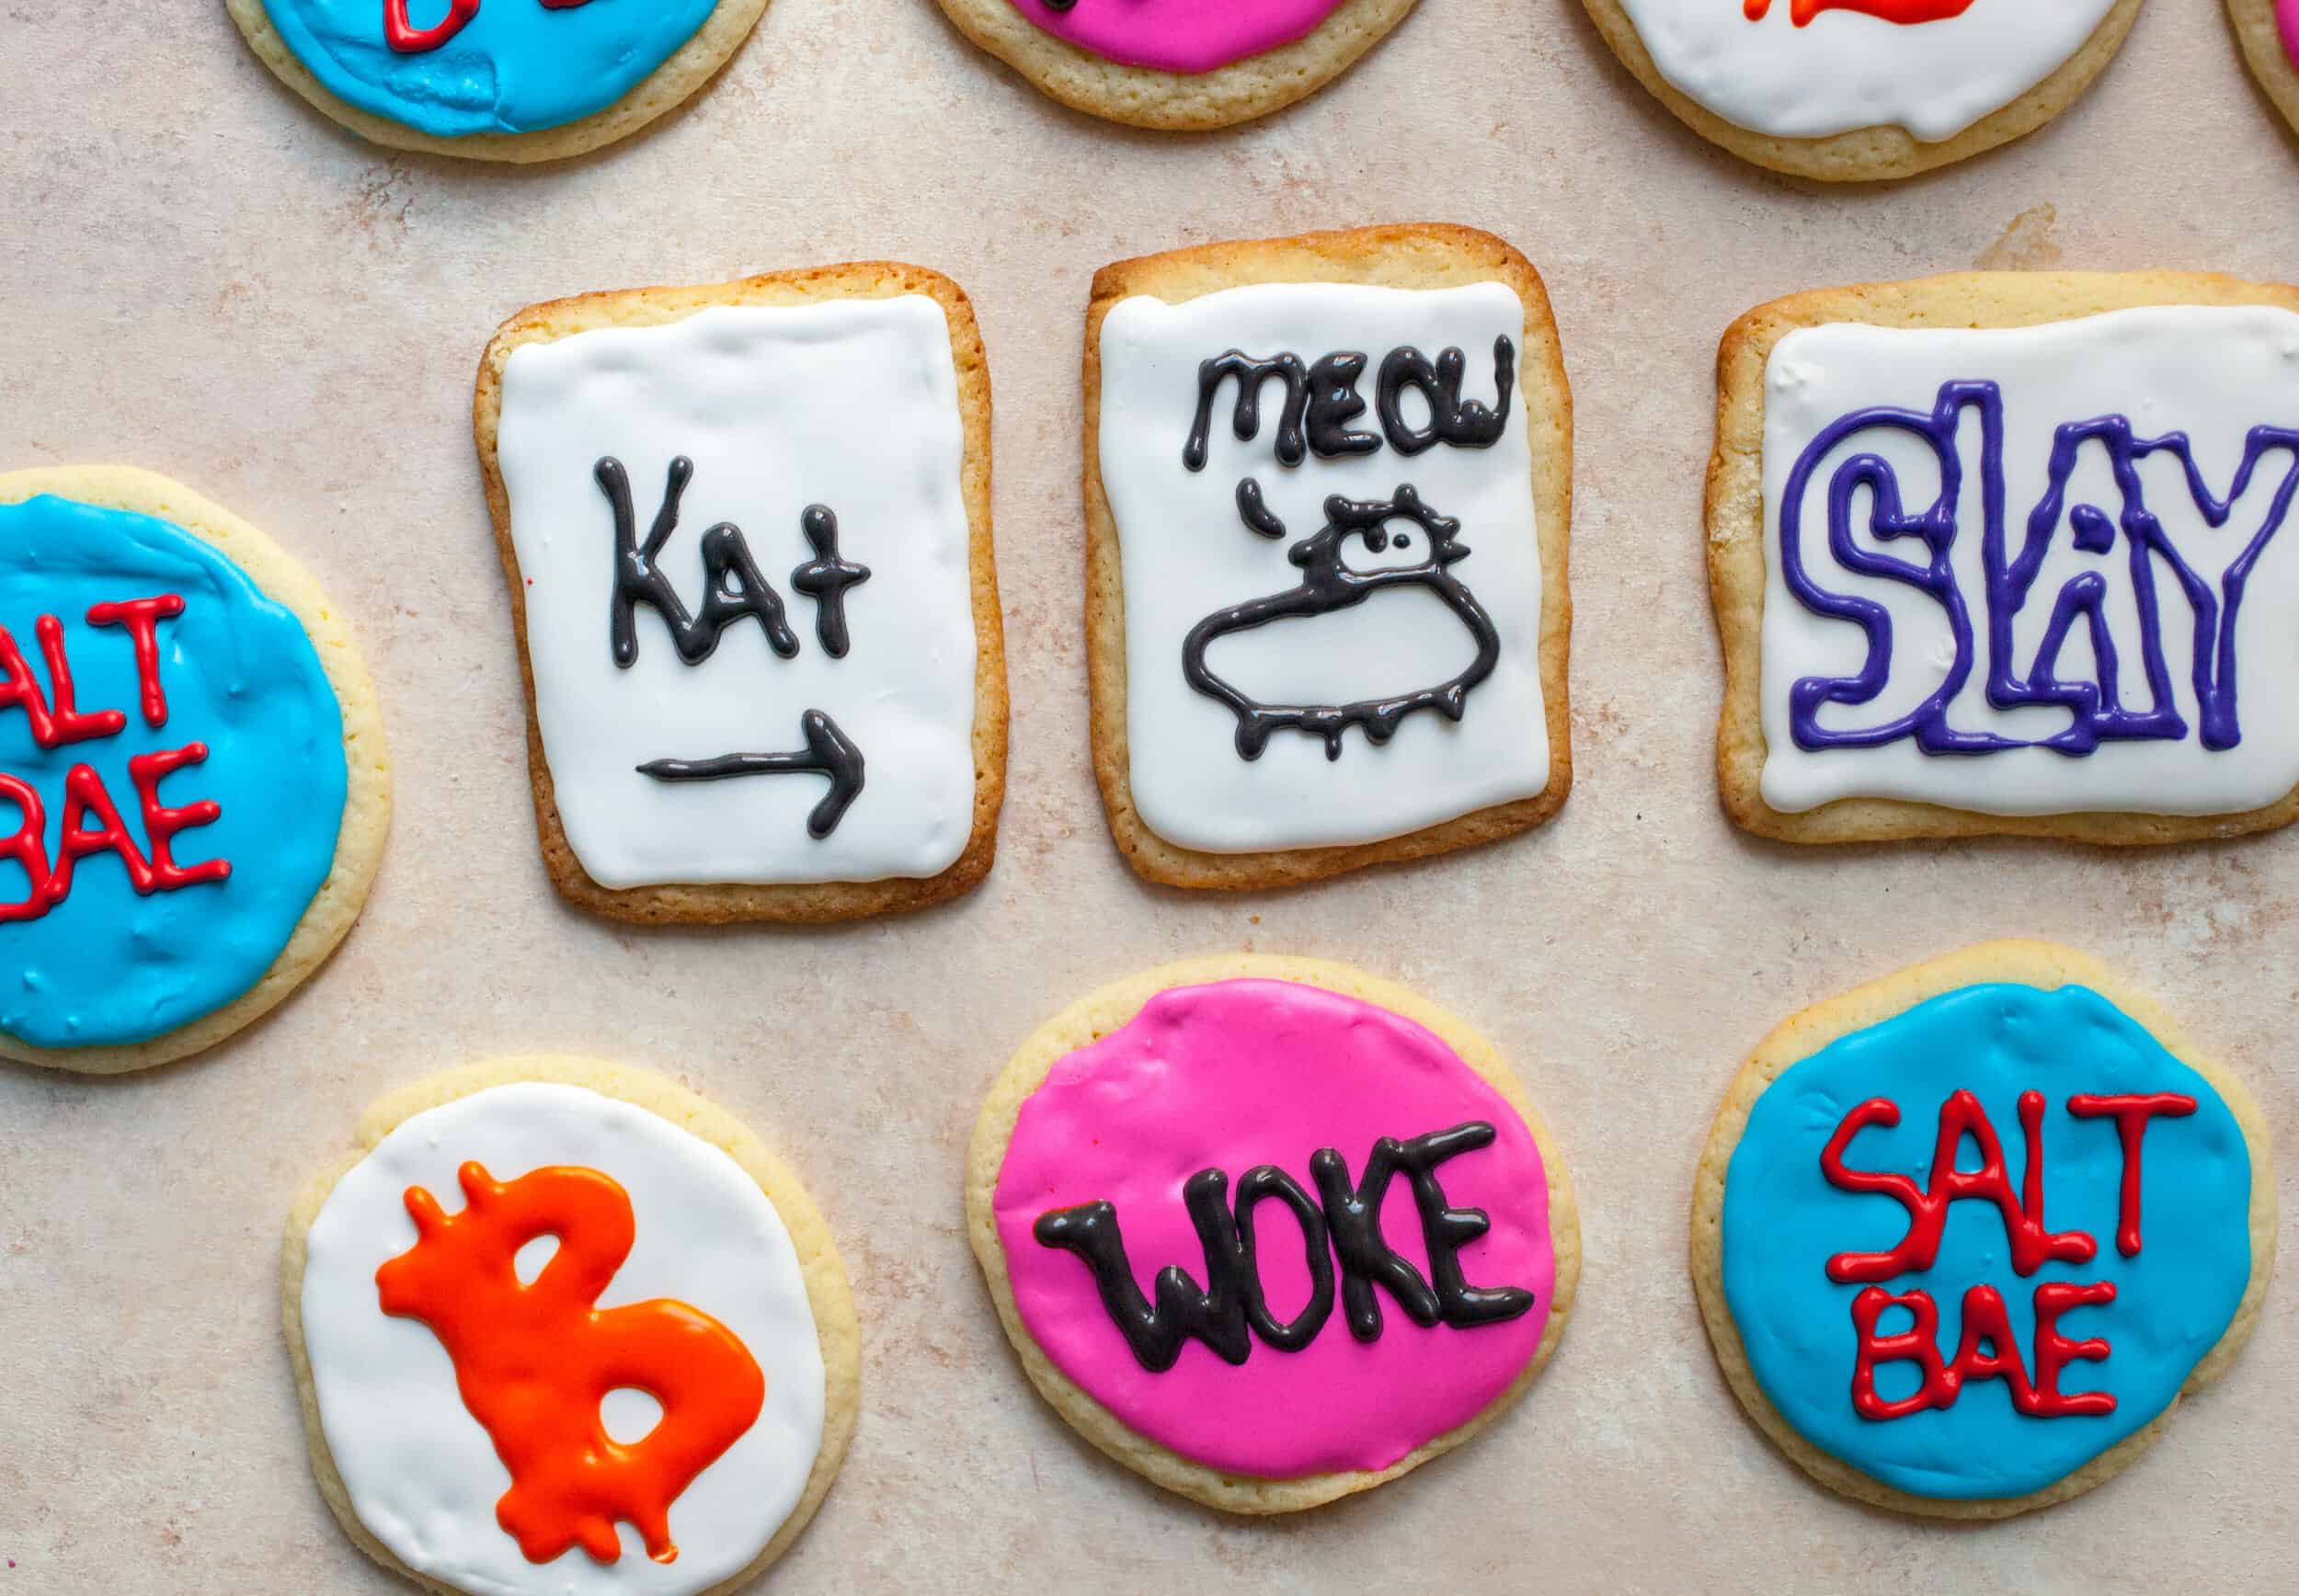 2017 was the year of the meme and so I thought I'd make some fun cookies based on some of the fun memes I saw in 2017. Leave a comment with the meme you would want in cookie form! | macheesmo.com